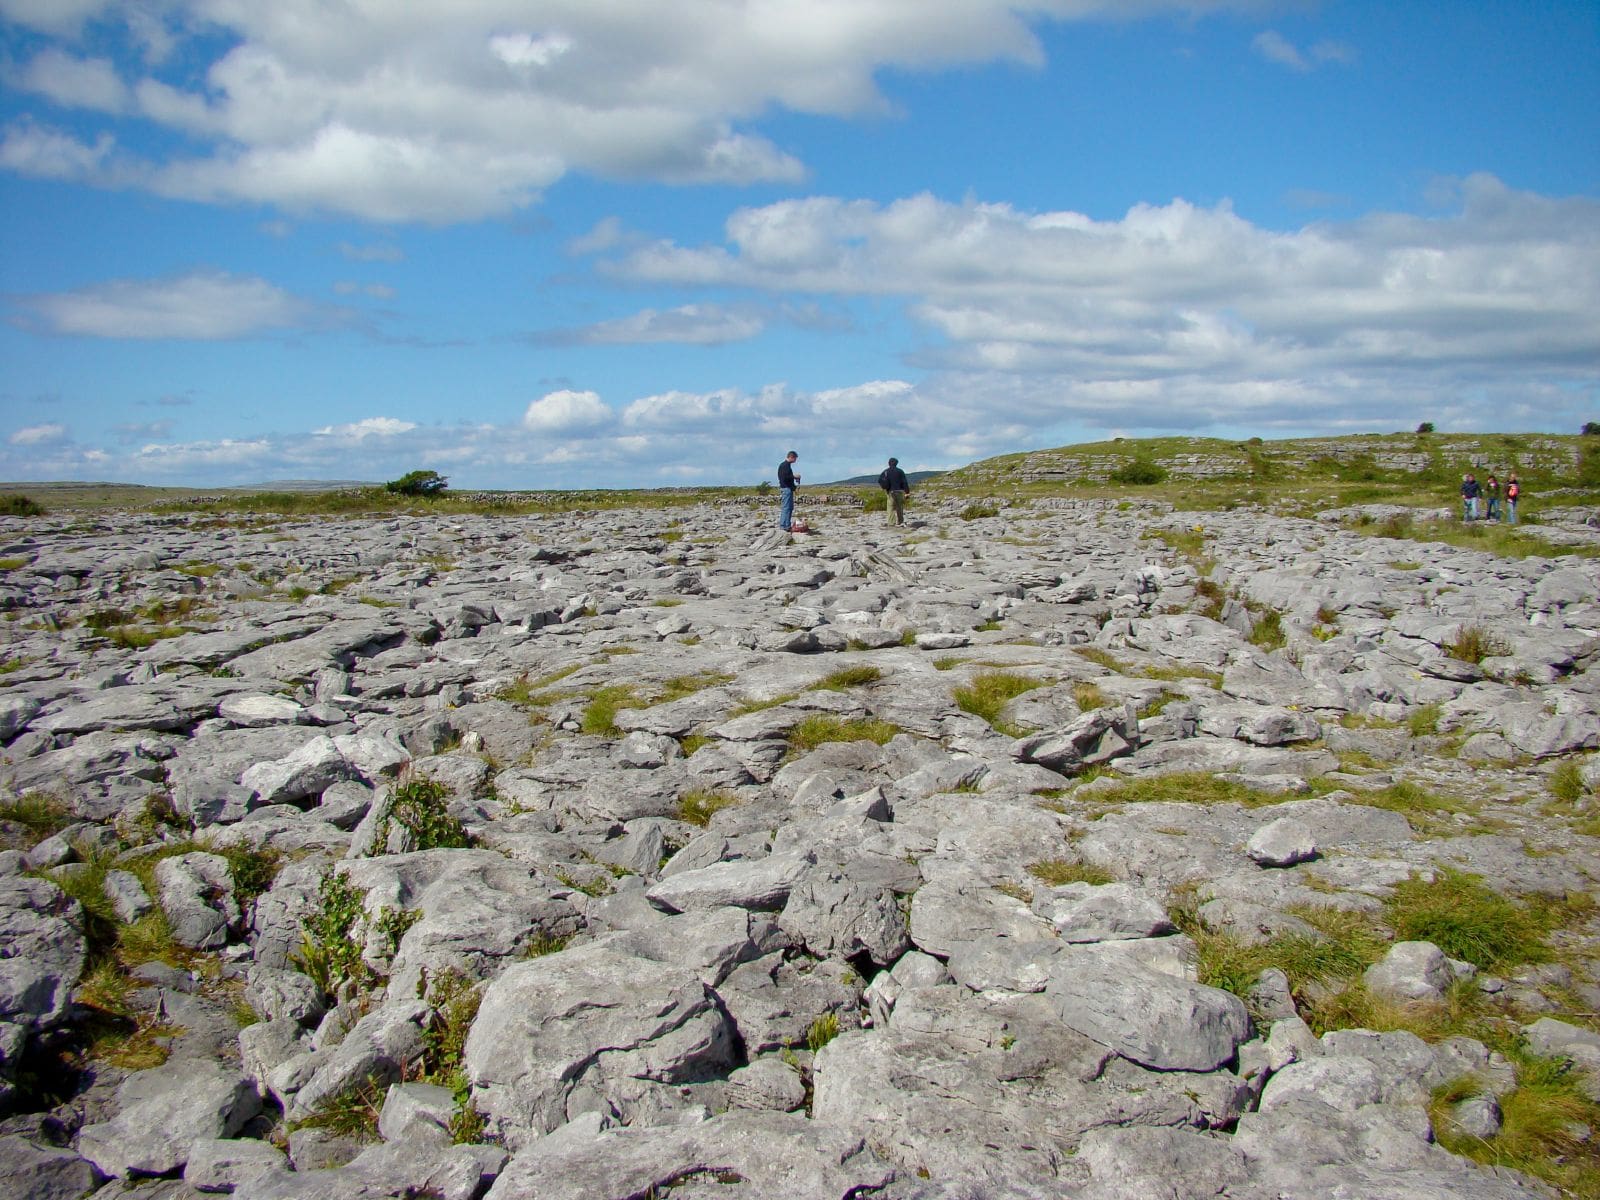 Burren National Park is a gorgeous place to visit in Ireland